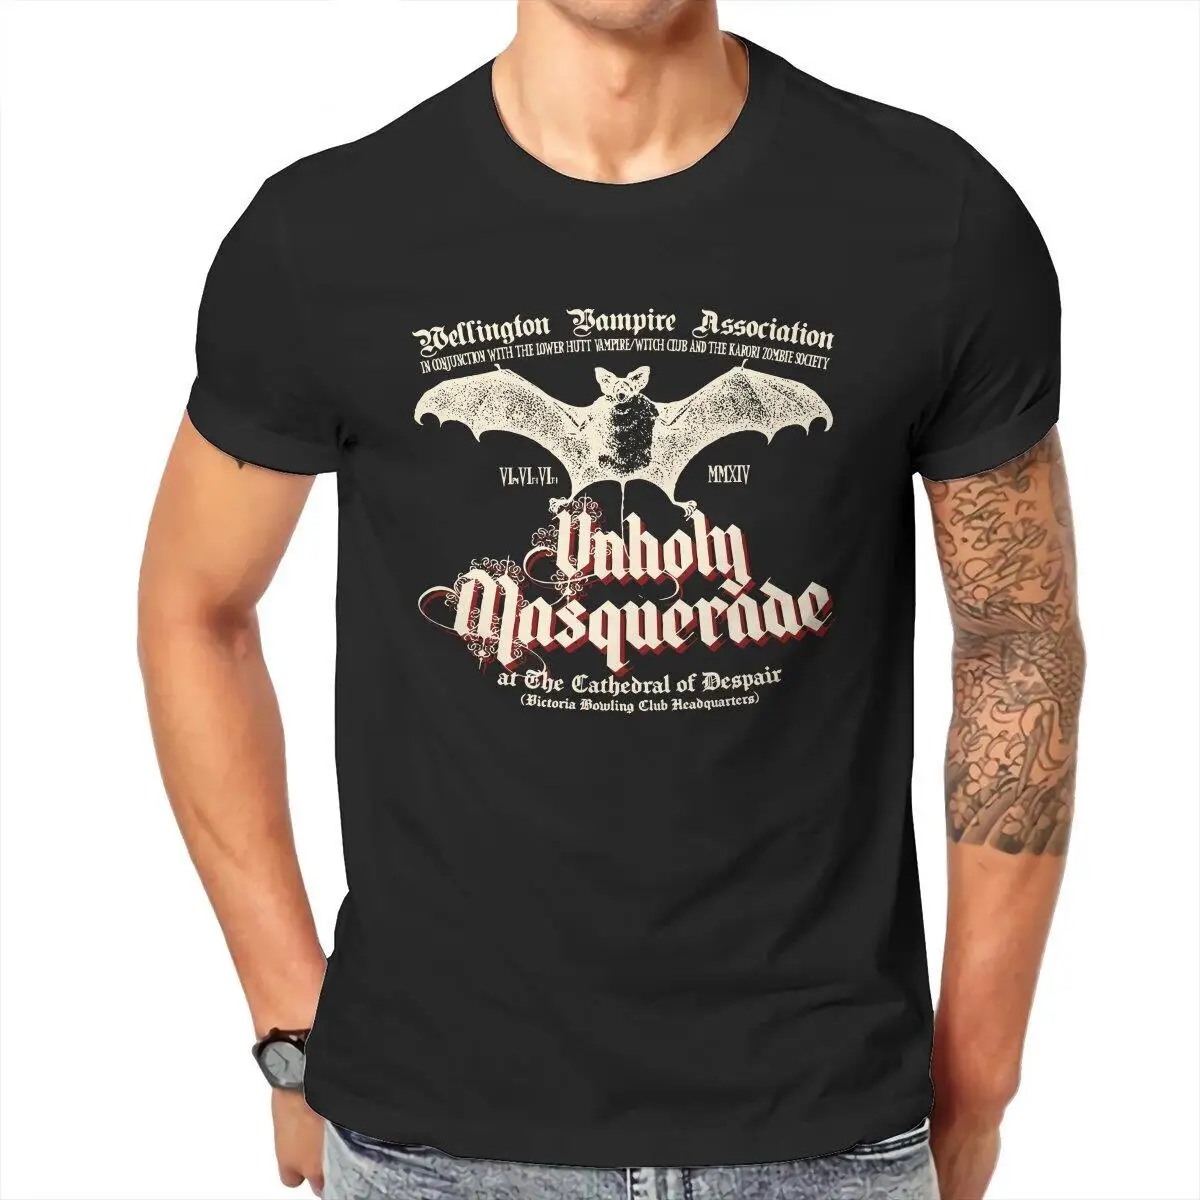 Men's T-Shirt Unholy Masquerade 100% Cotton Tees Short Sleeve What We Do in the Shadows T Shirt Round Collar Tops Plus Size